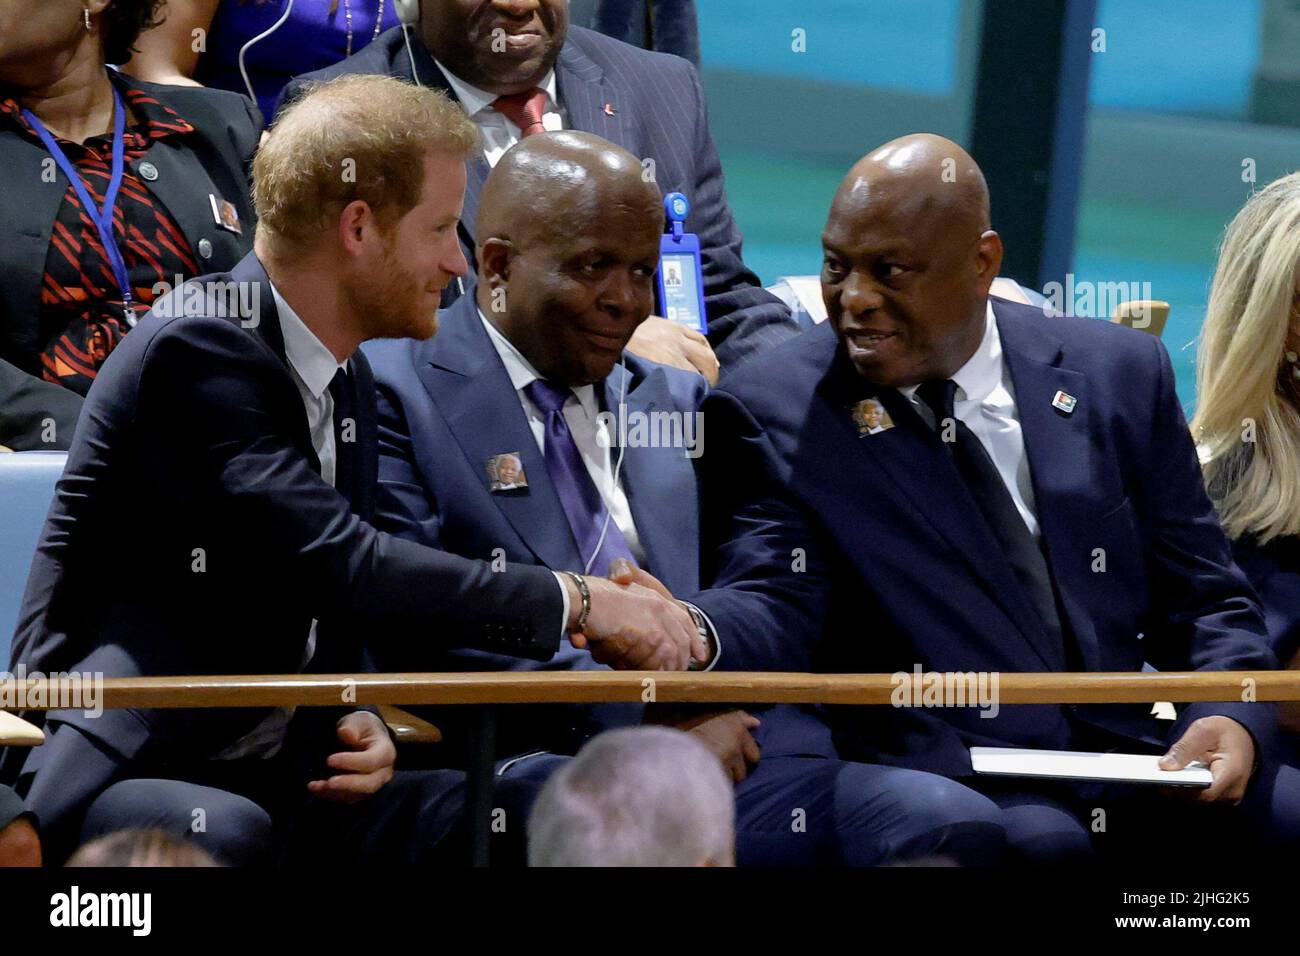 Britain's Prince Harry and Guinean Foreign Minister Morissanda Kouyate shake hands at the United Nations General Assembly celebration of Nelson Mandela International Day at United Nations Headquarters in New York, U.S., July 18, 2022. REUTERS/Eduardo Munoz Stock Photo